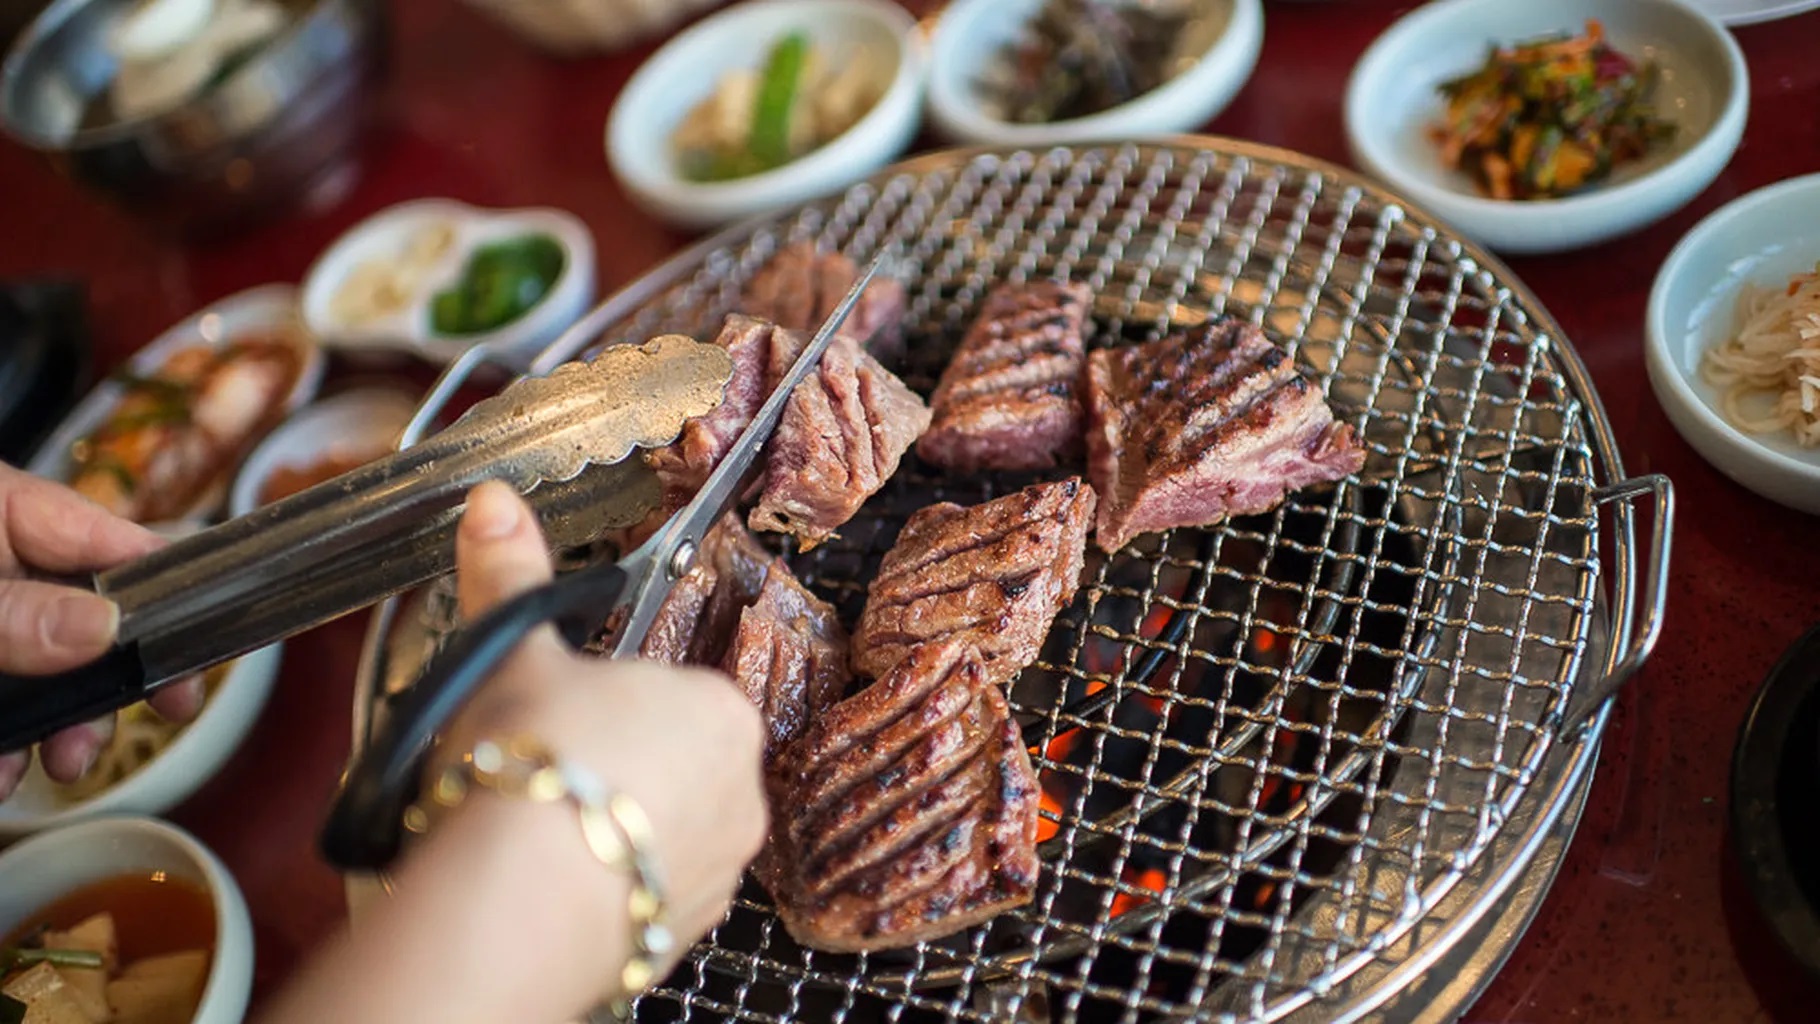 A hand with scissors cuts meat on the barbecue grill.